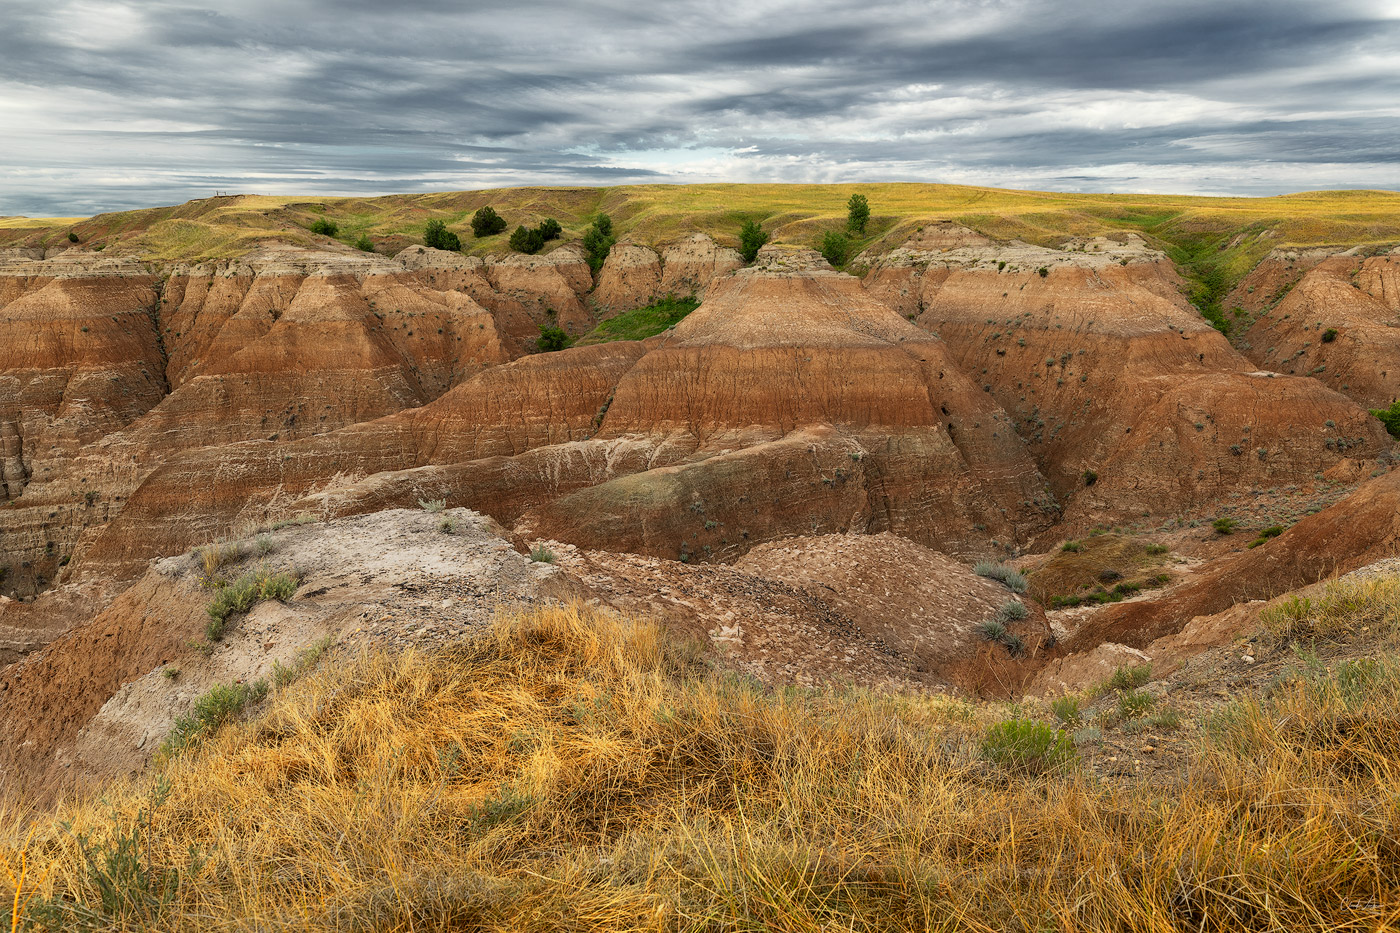 View of colorful buttes at Badlands National Park in South Dakota at sunrise.